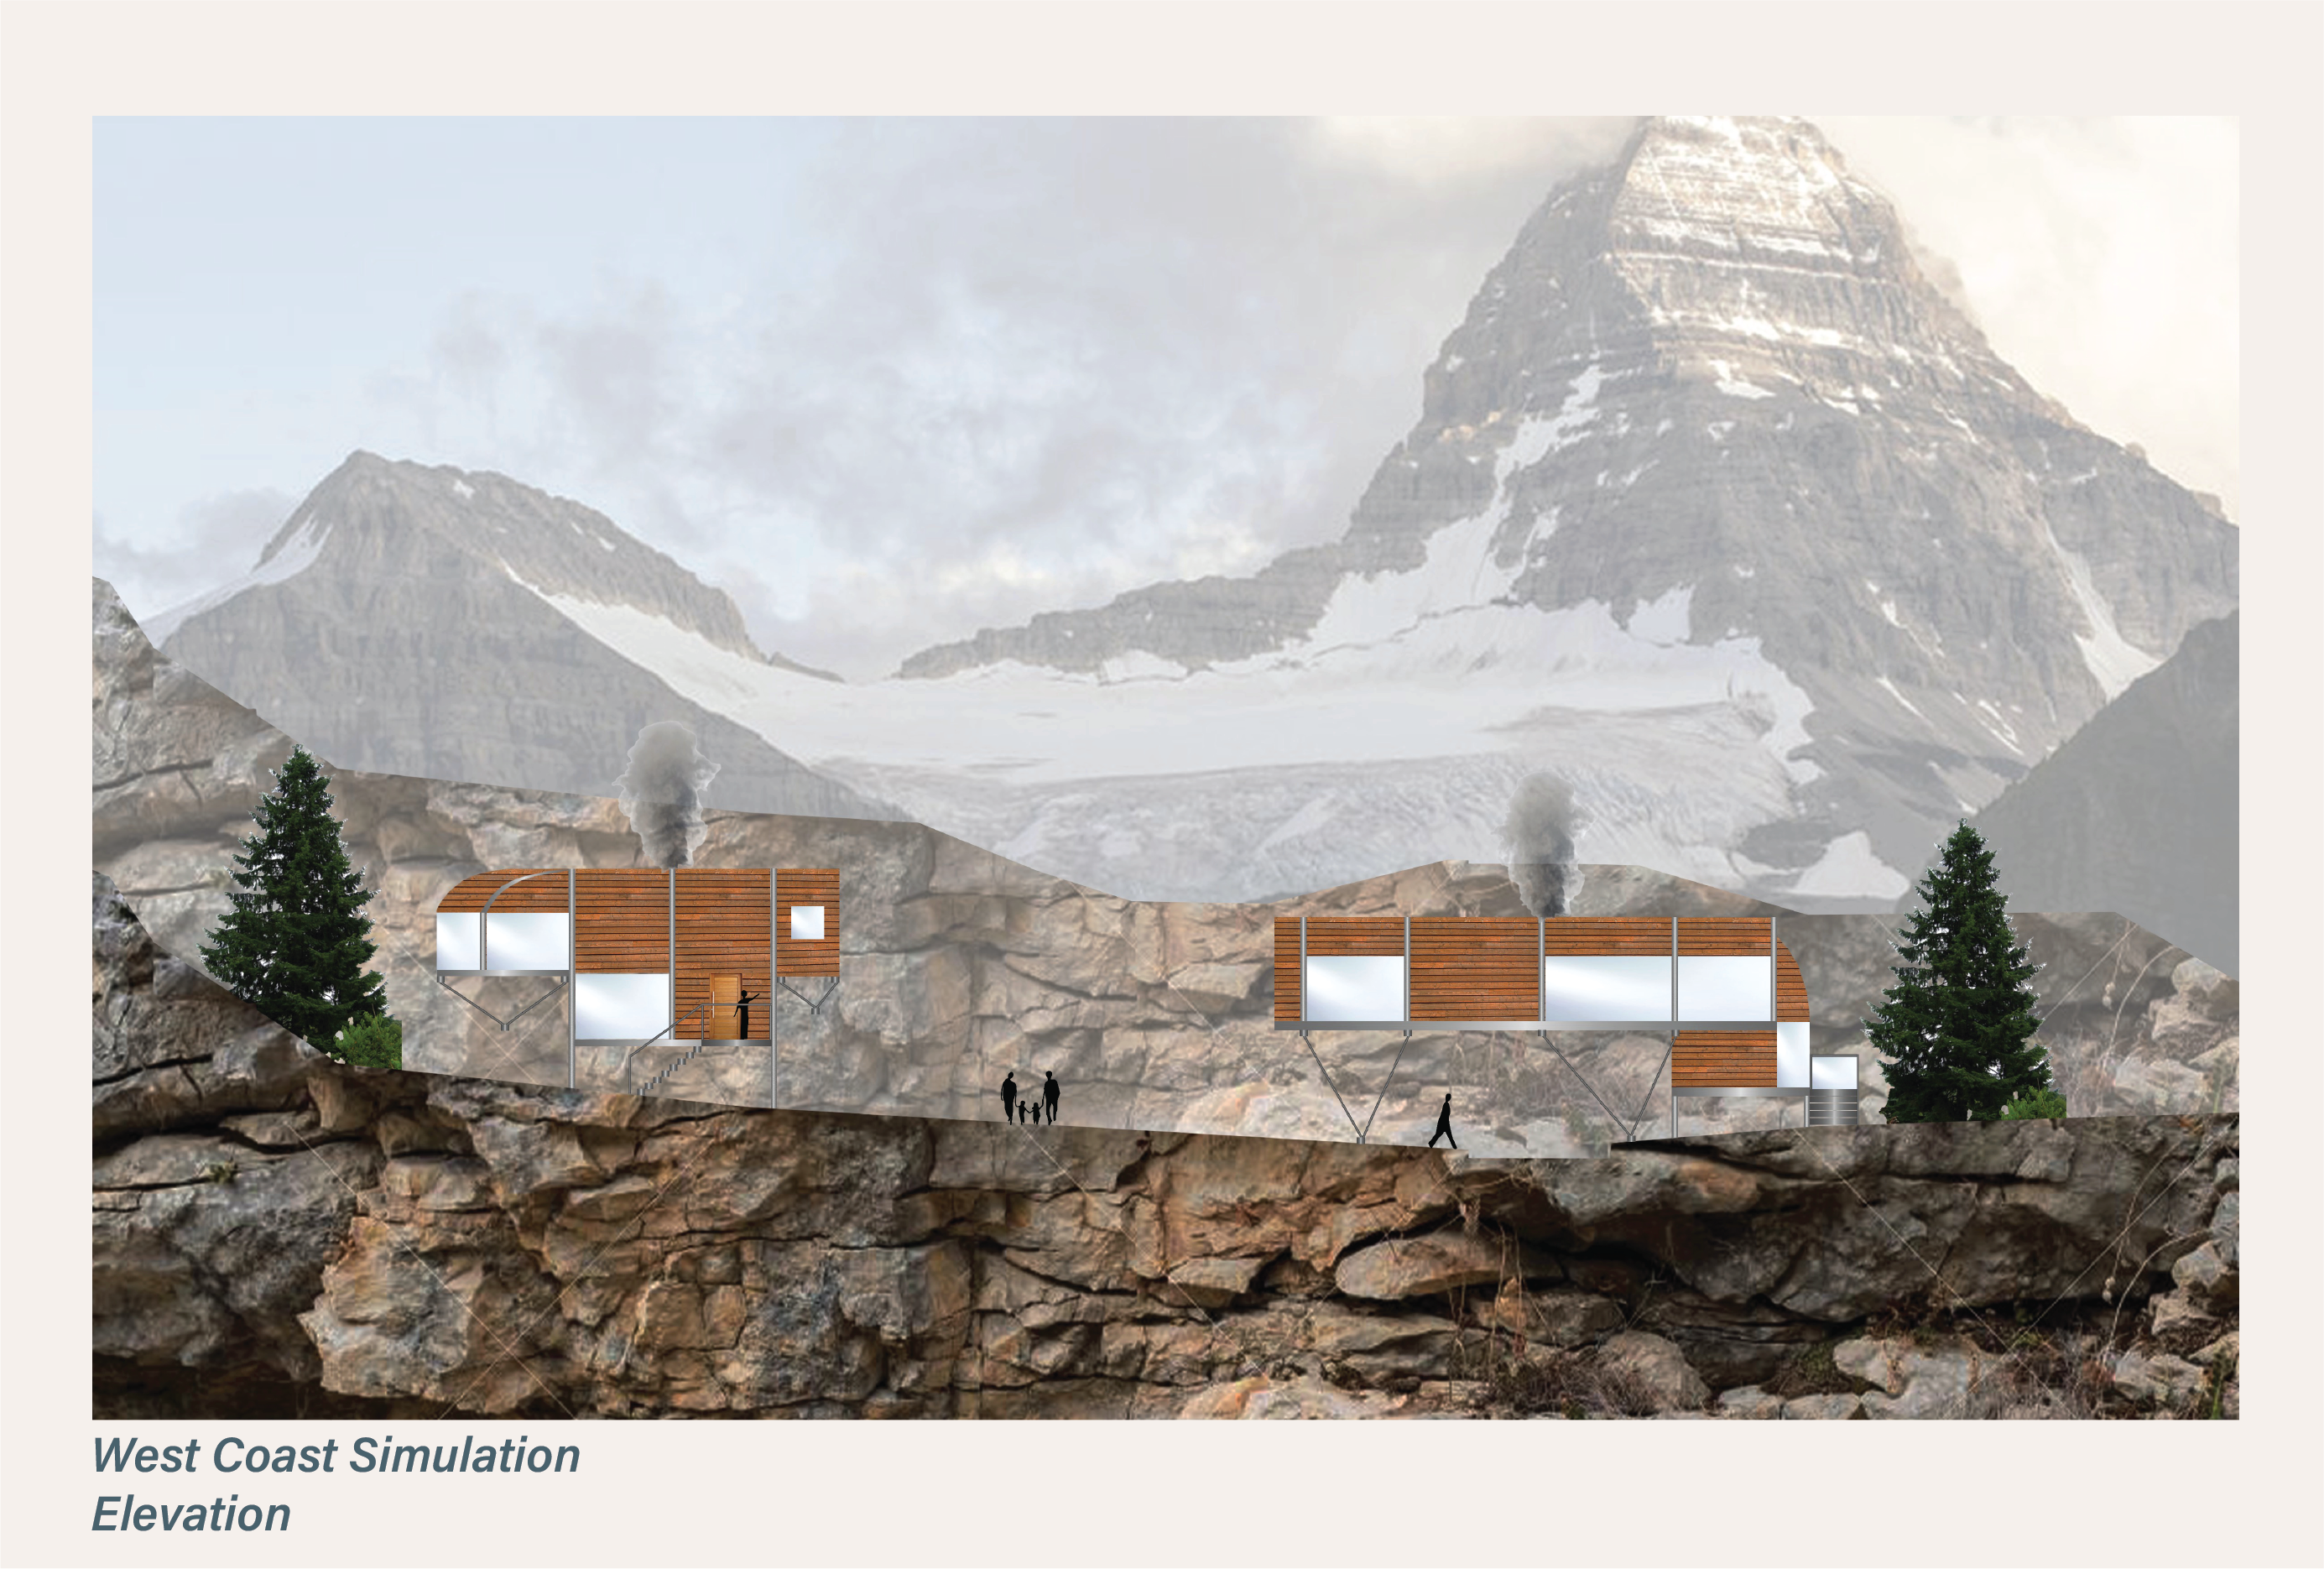 Thesis Project: The Indigenous Housing Crisis and Modular Design